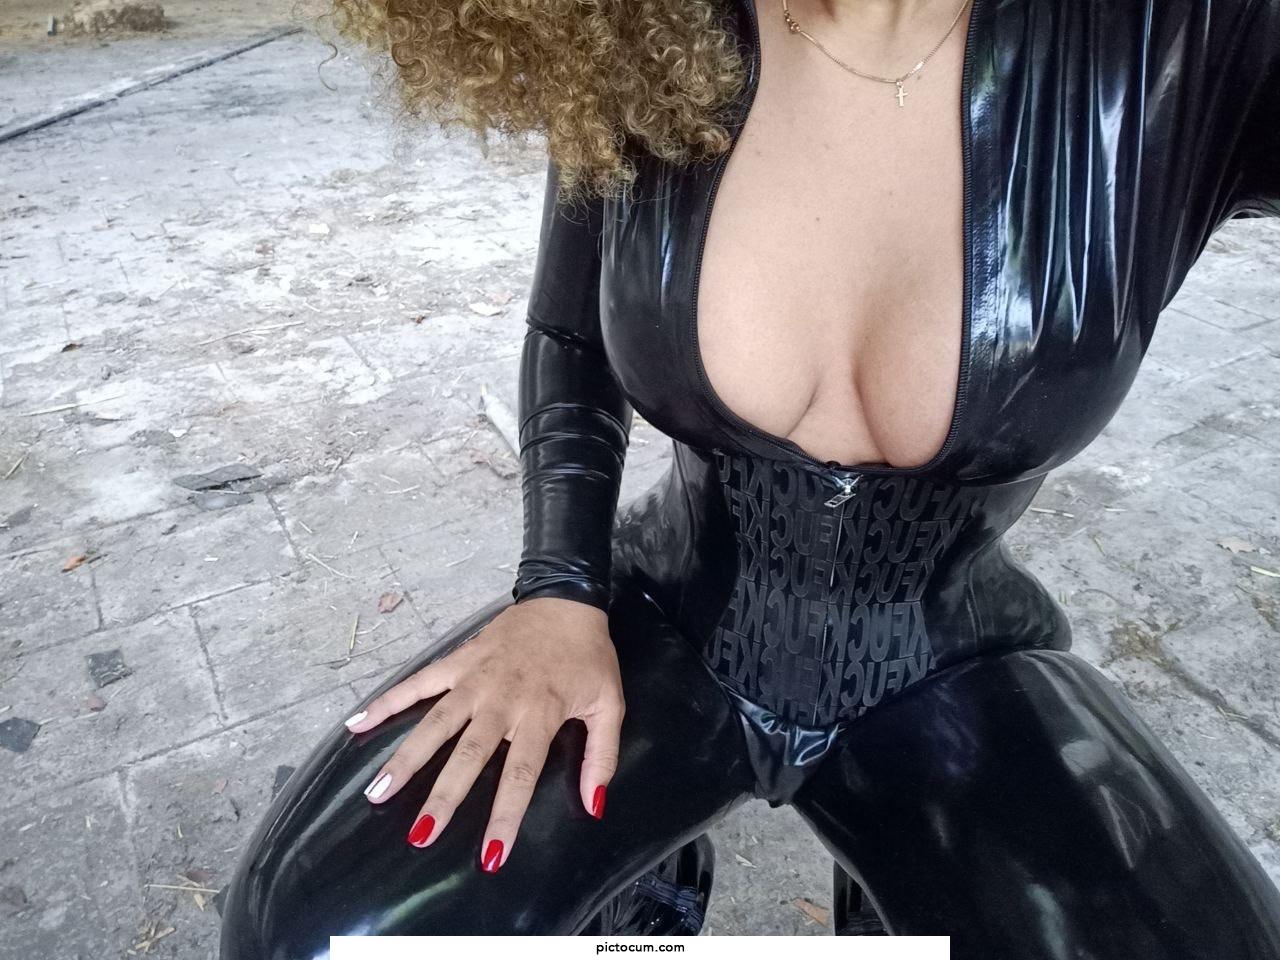 BDSM or catwoman?